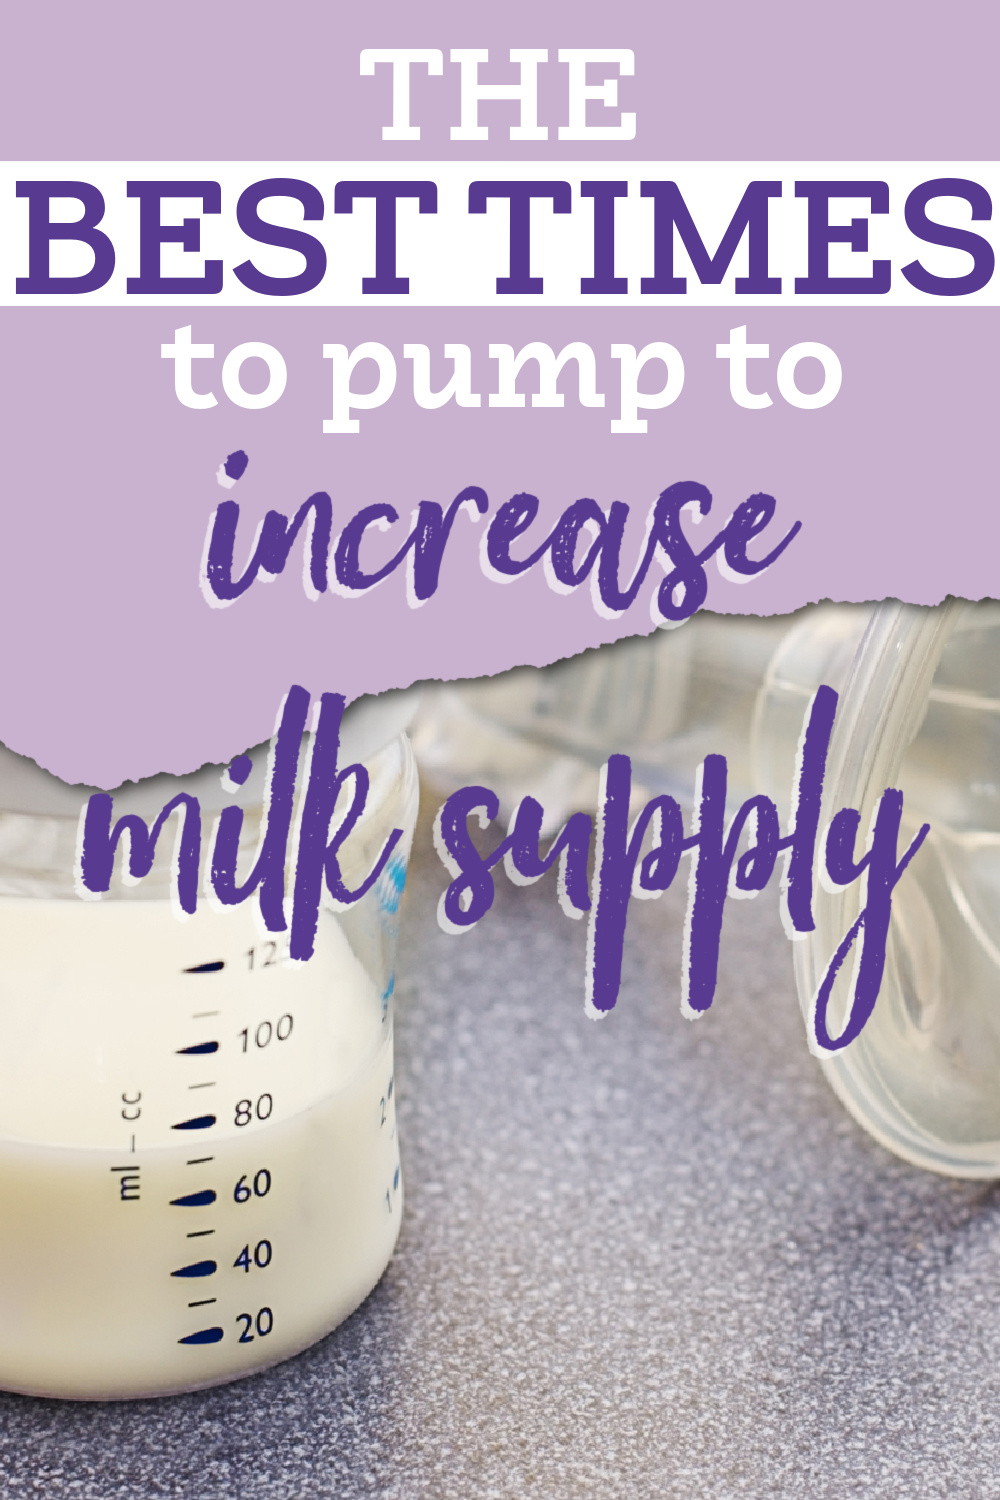 best times to pump to increase milk supply